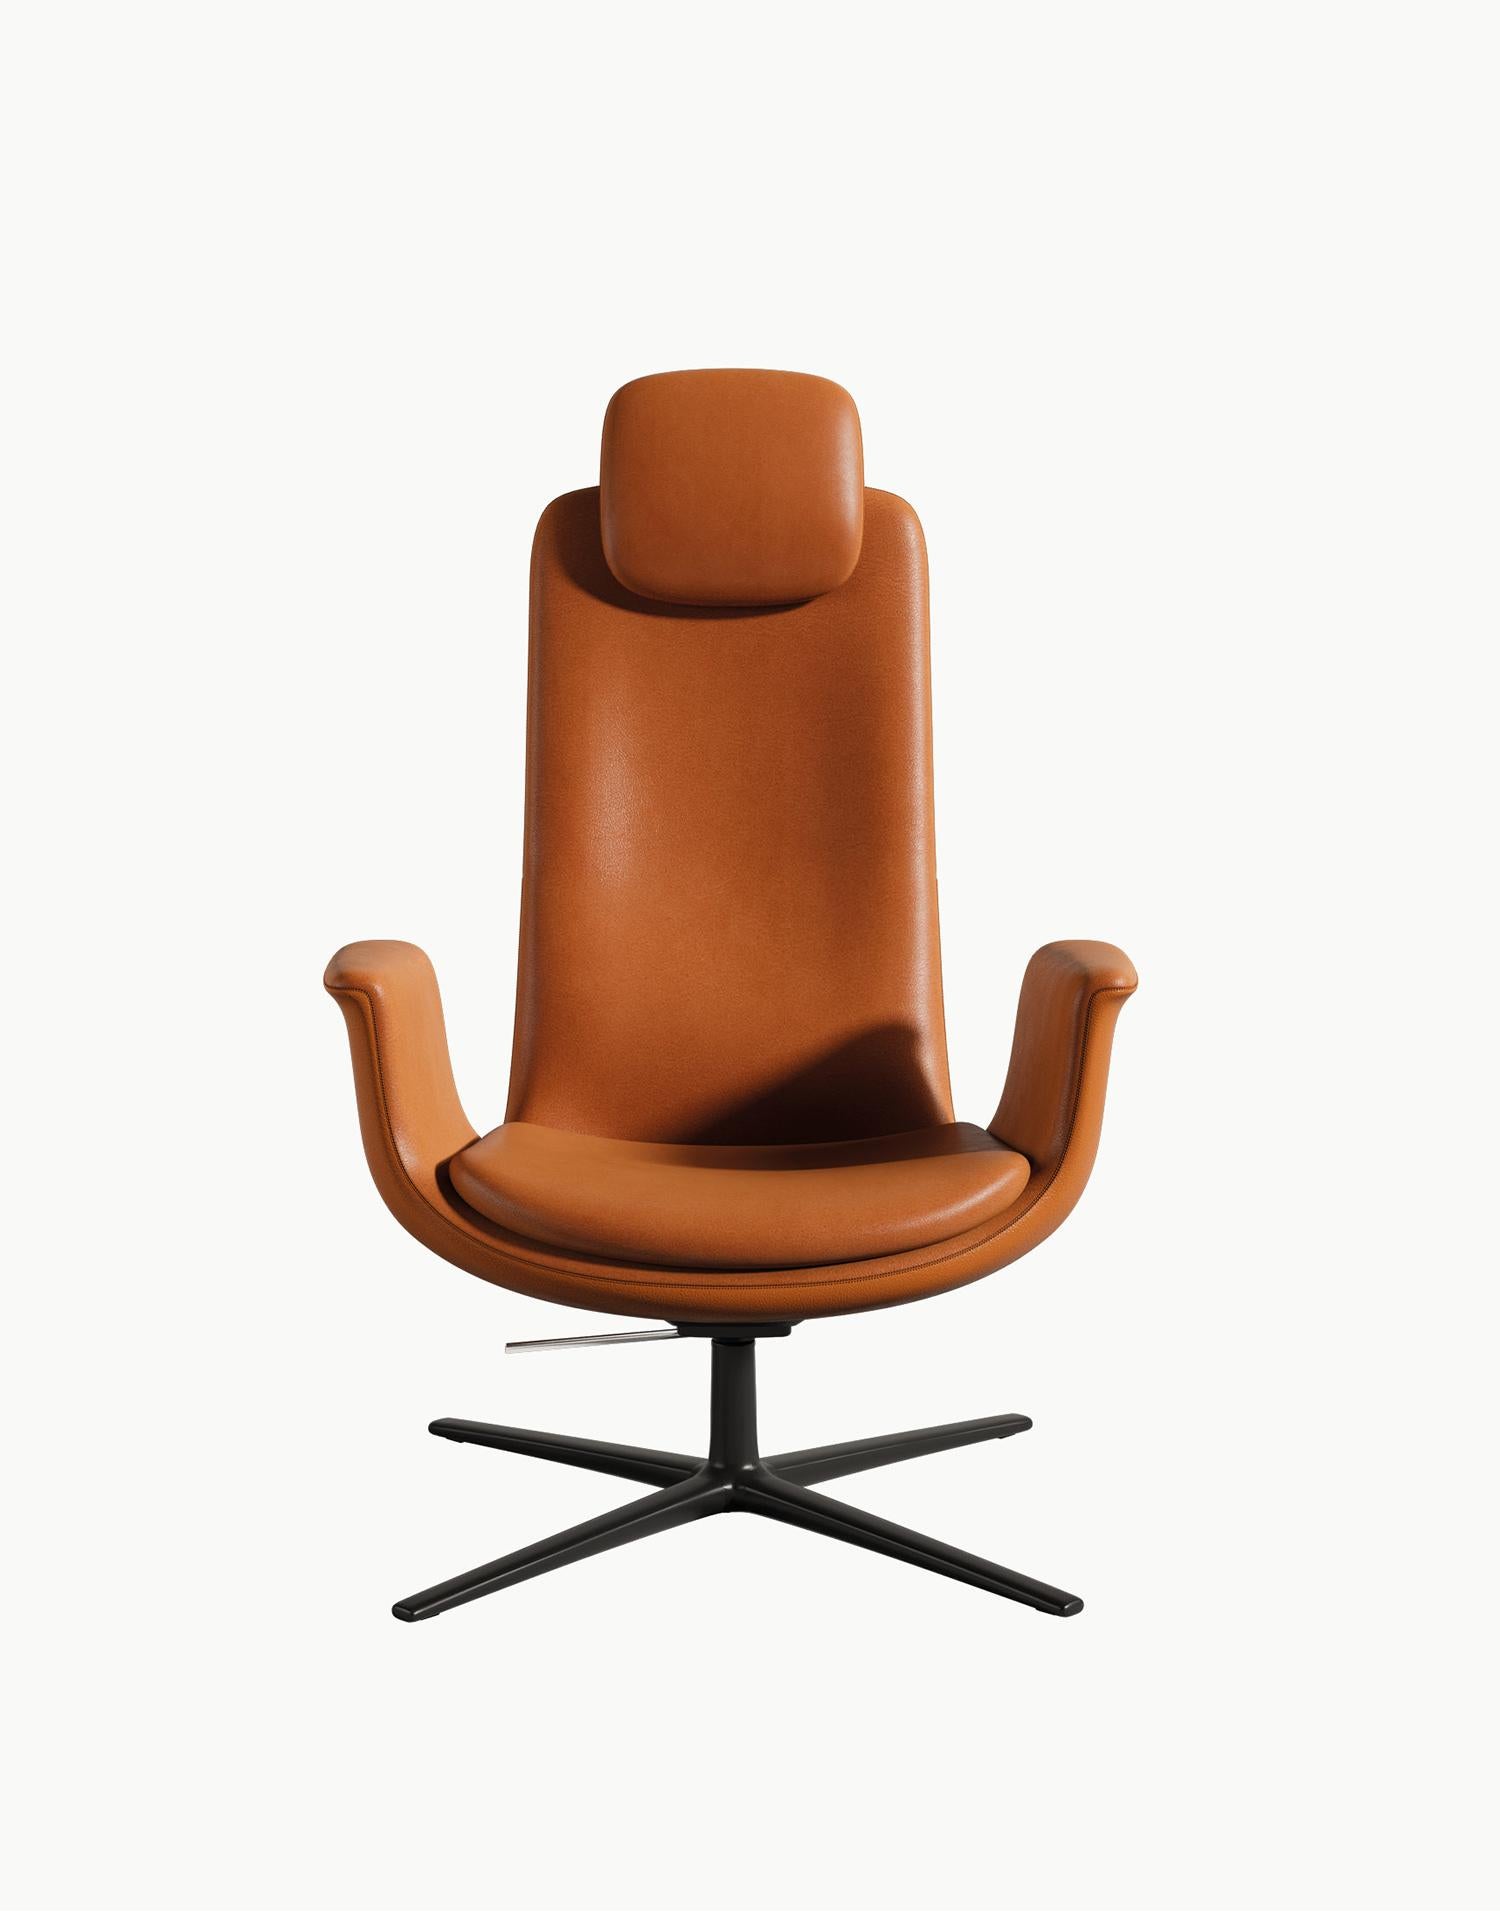 Oddysey Brown Small Headrest Armchair by Eugeni Quitllet
Dimensions: D 75 x W 81 x H 107 cm.
Materials: Polyurethane foam, steel, felt and leather.

A flexible moulded polyurethane injected foam body, seat cushion and headrest. Both the body and